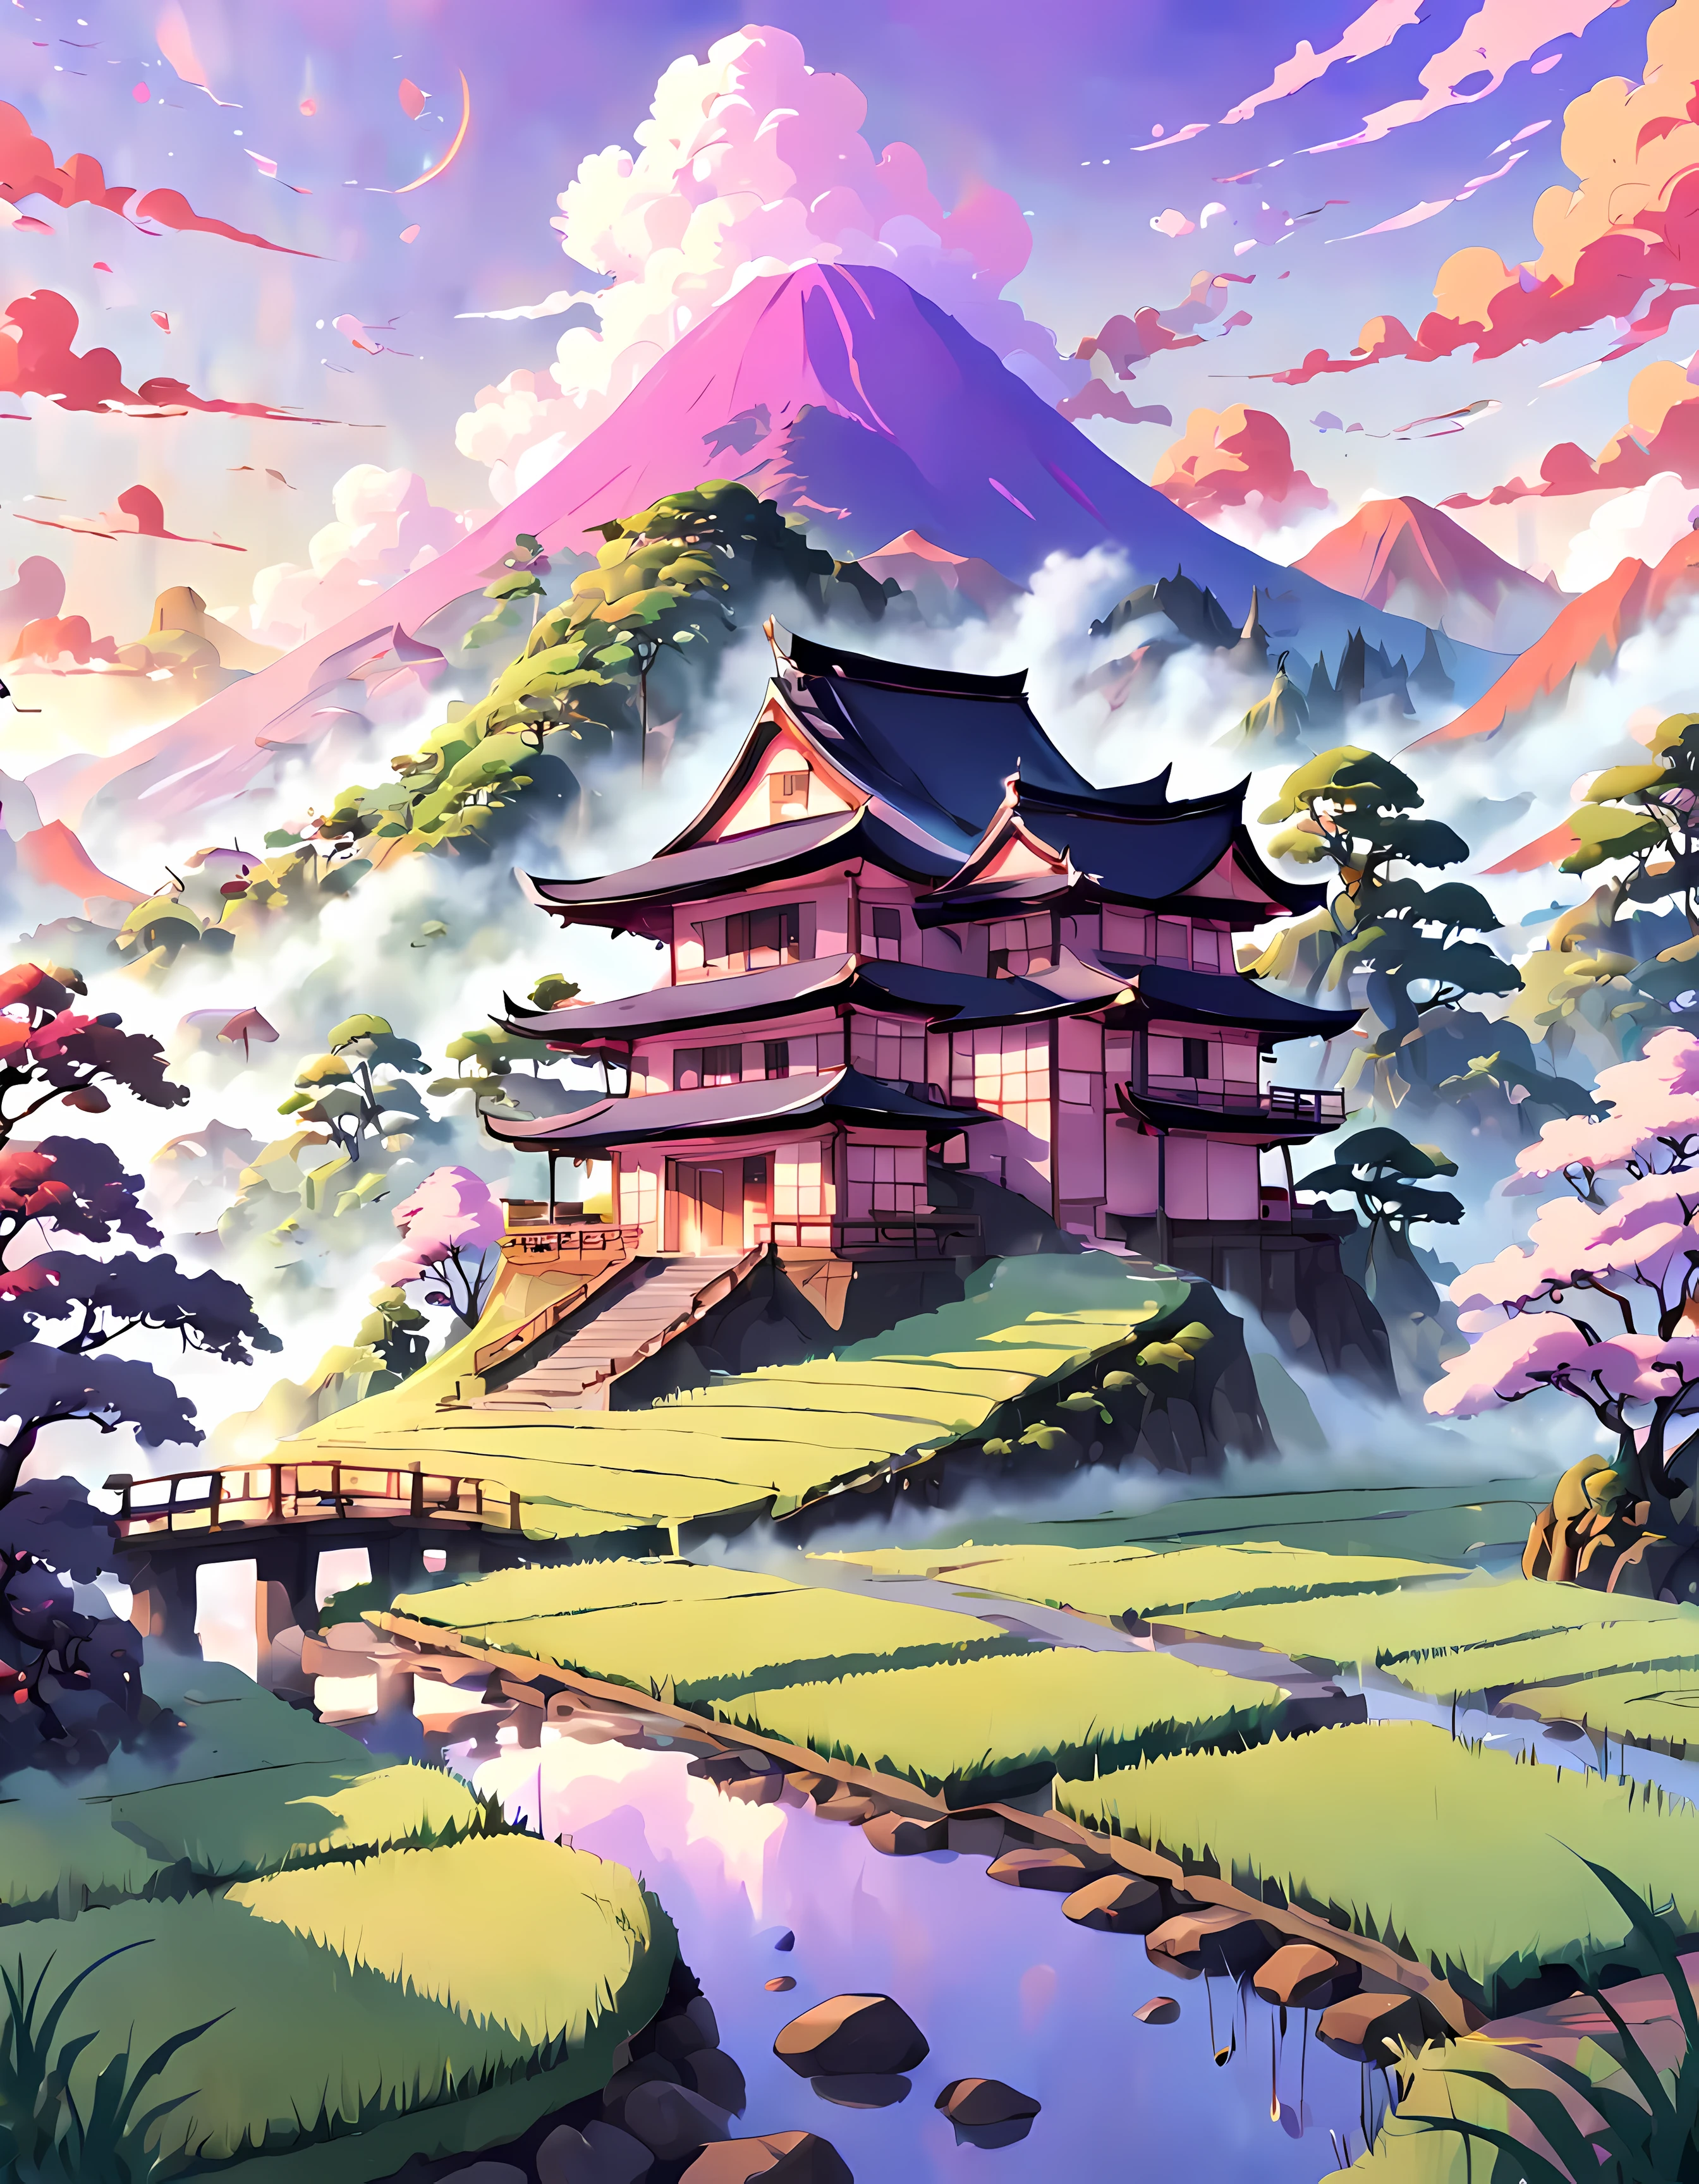 (Surrelasim:1.4), cute anime style, design a captivating image of a (mystical mist) hovering above a lush rice paddy, mesmerizing dawn with hues of orange, pink and purple, (Japanese architecture), cloudy, dreamy, masterpiece in maximum 16K resolution, superb quality. | ((More_Detail))